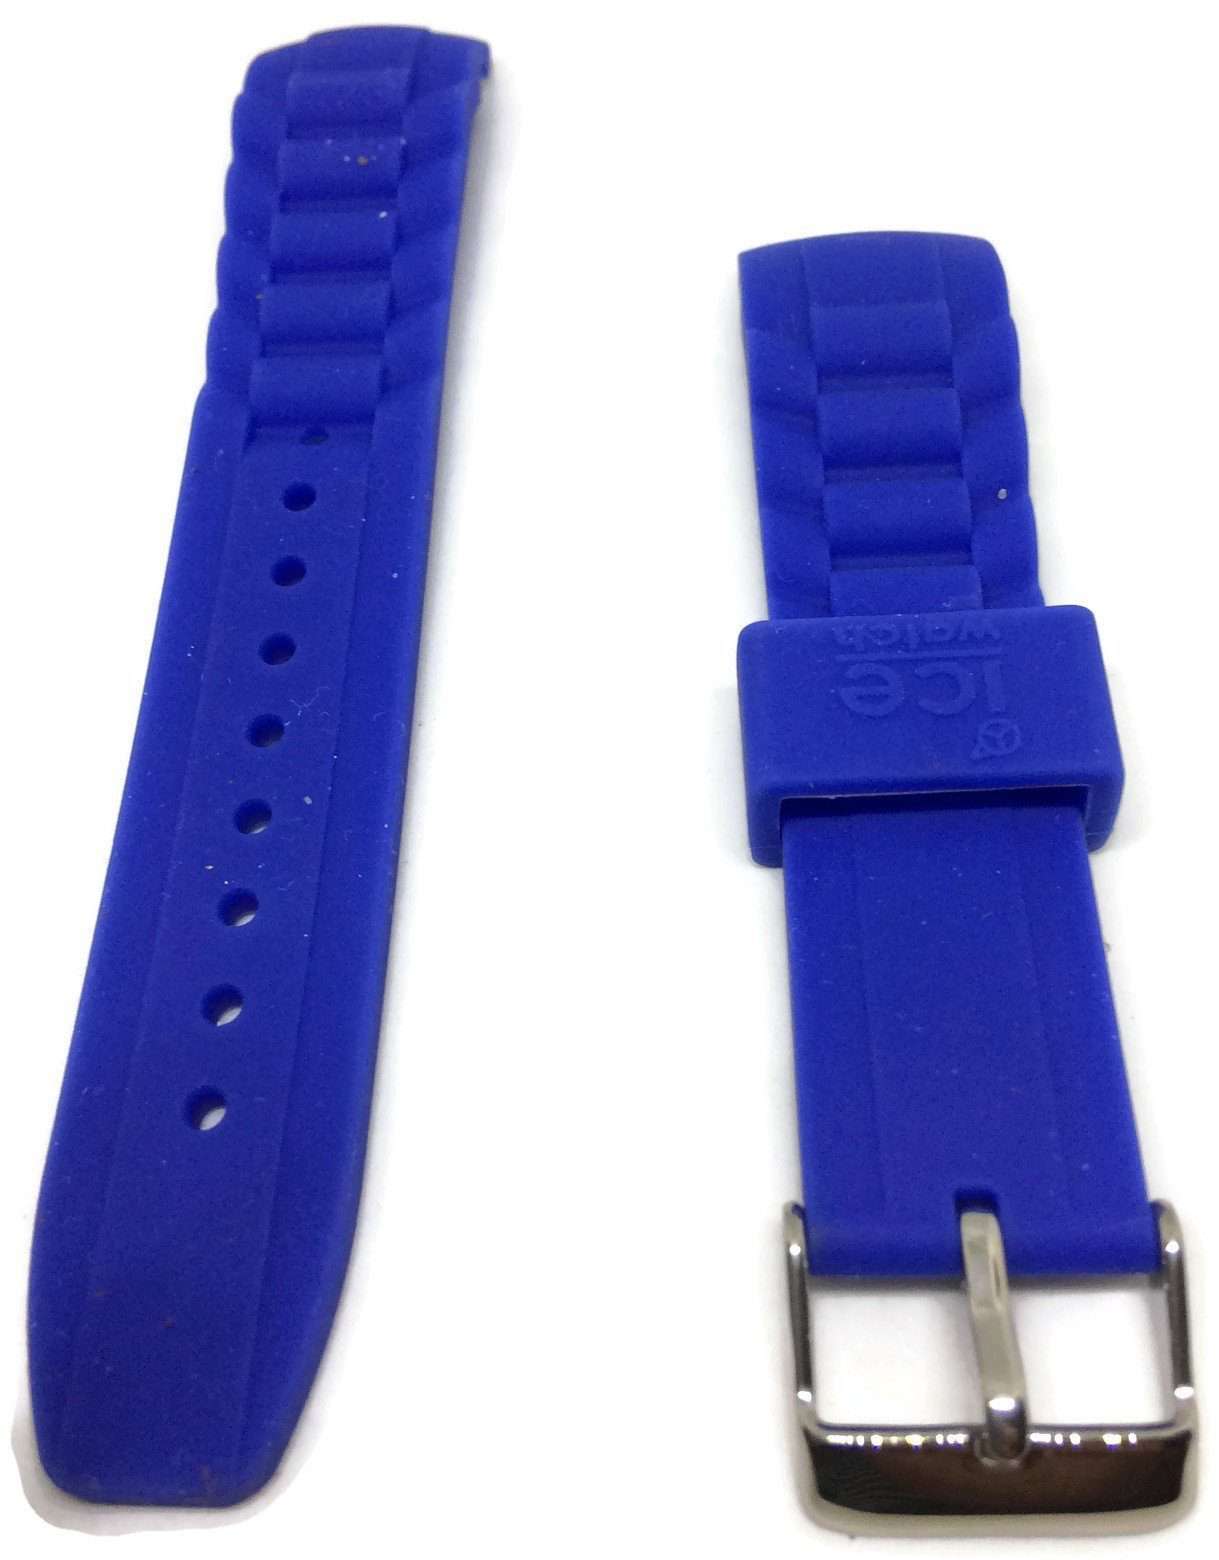 Home › Ice Watch Straps › Authentic Ice Watch Strap Blue with Stainless ...